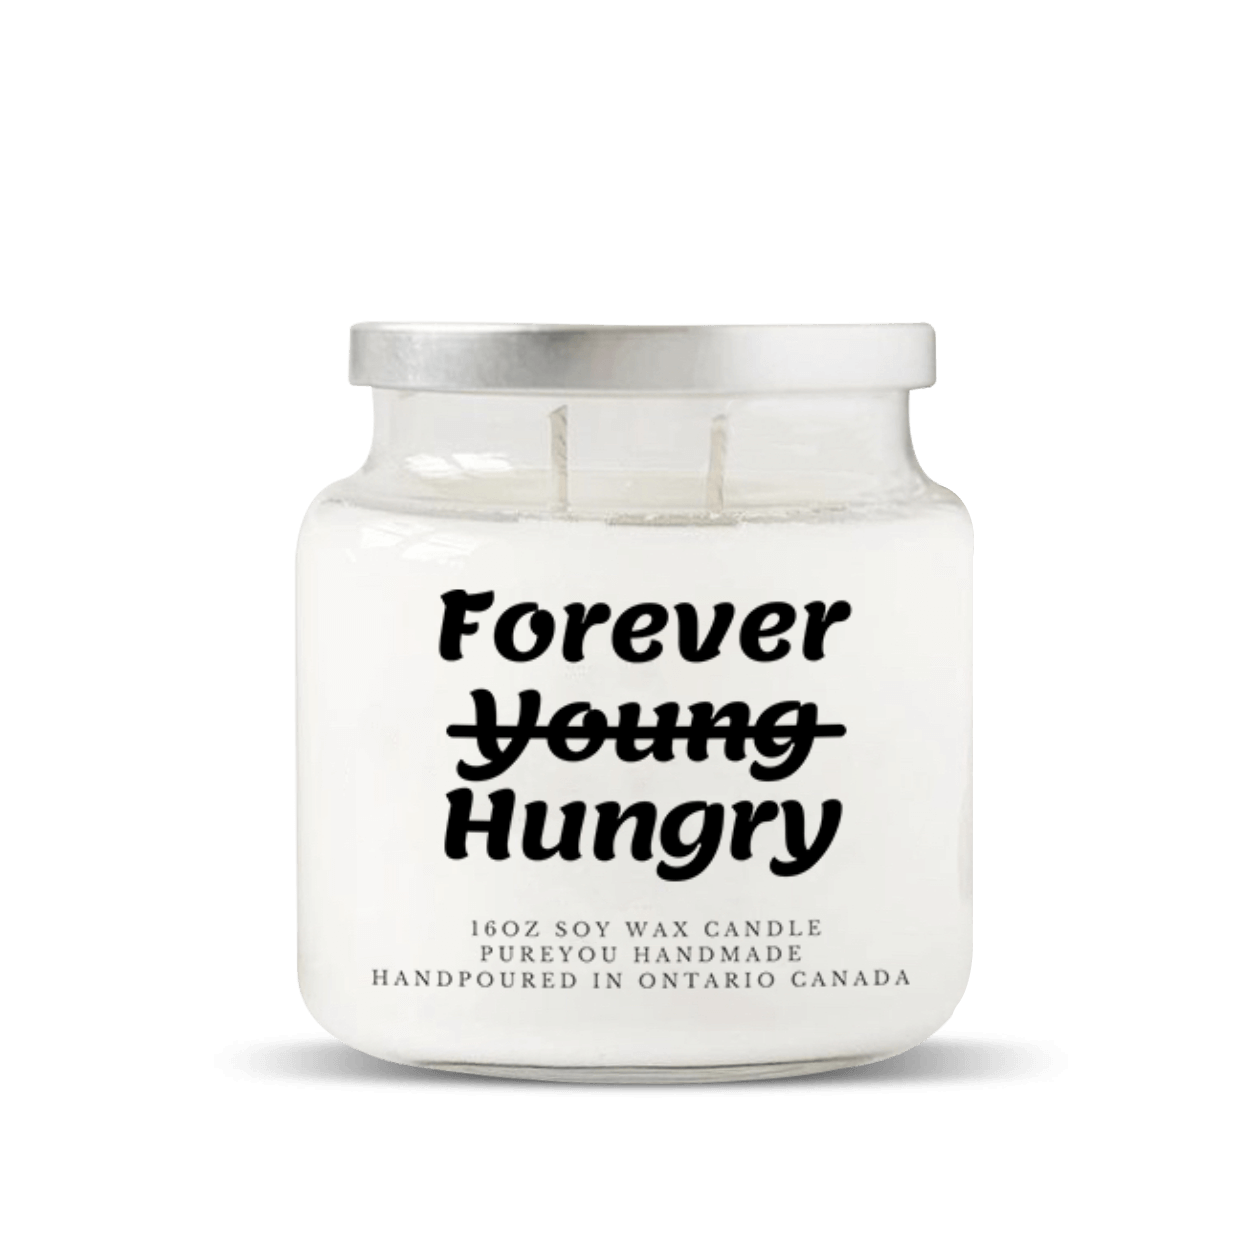 "Forever Hungry” Soy Wax Candle